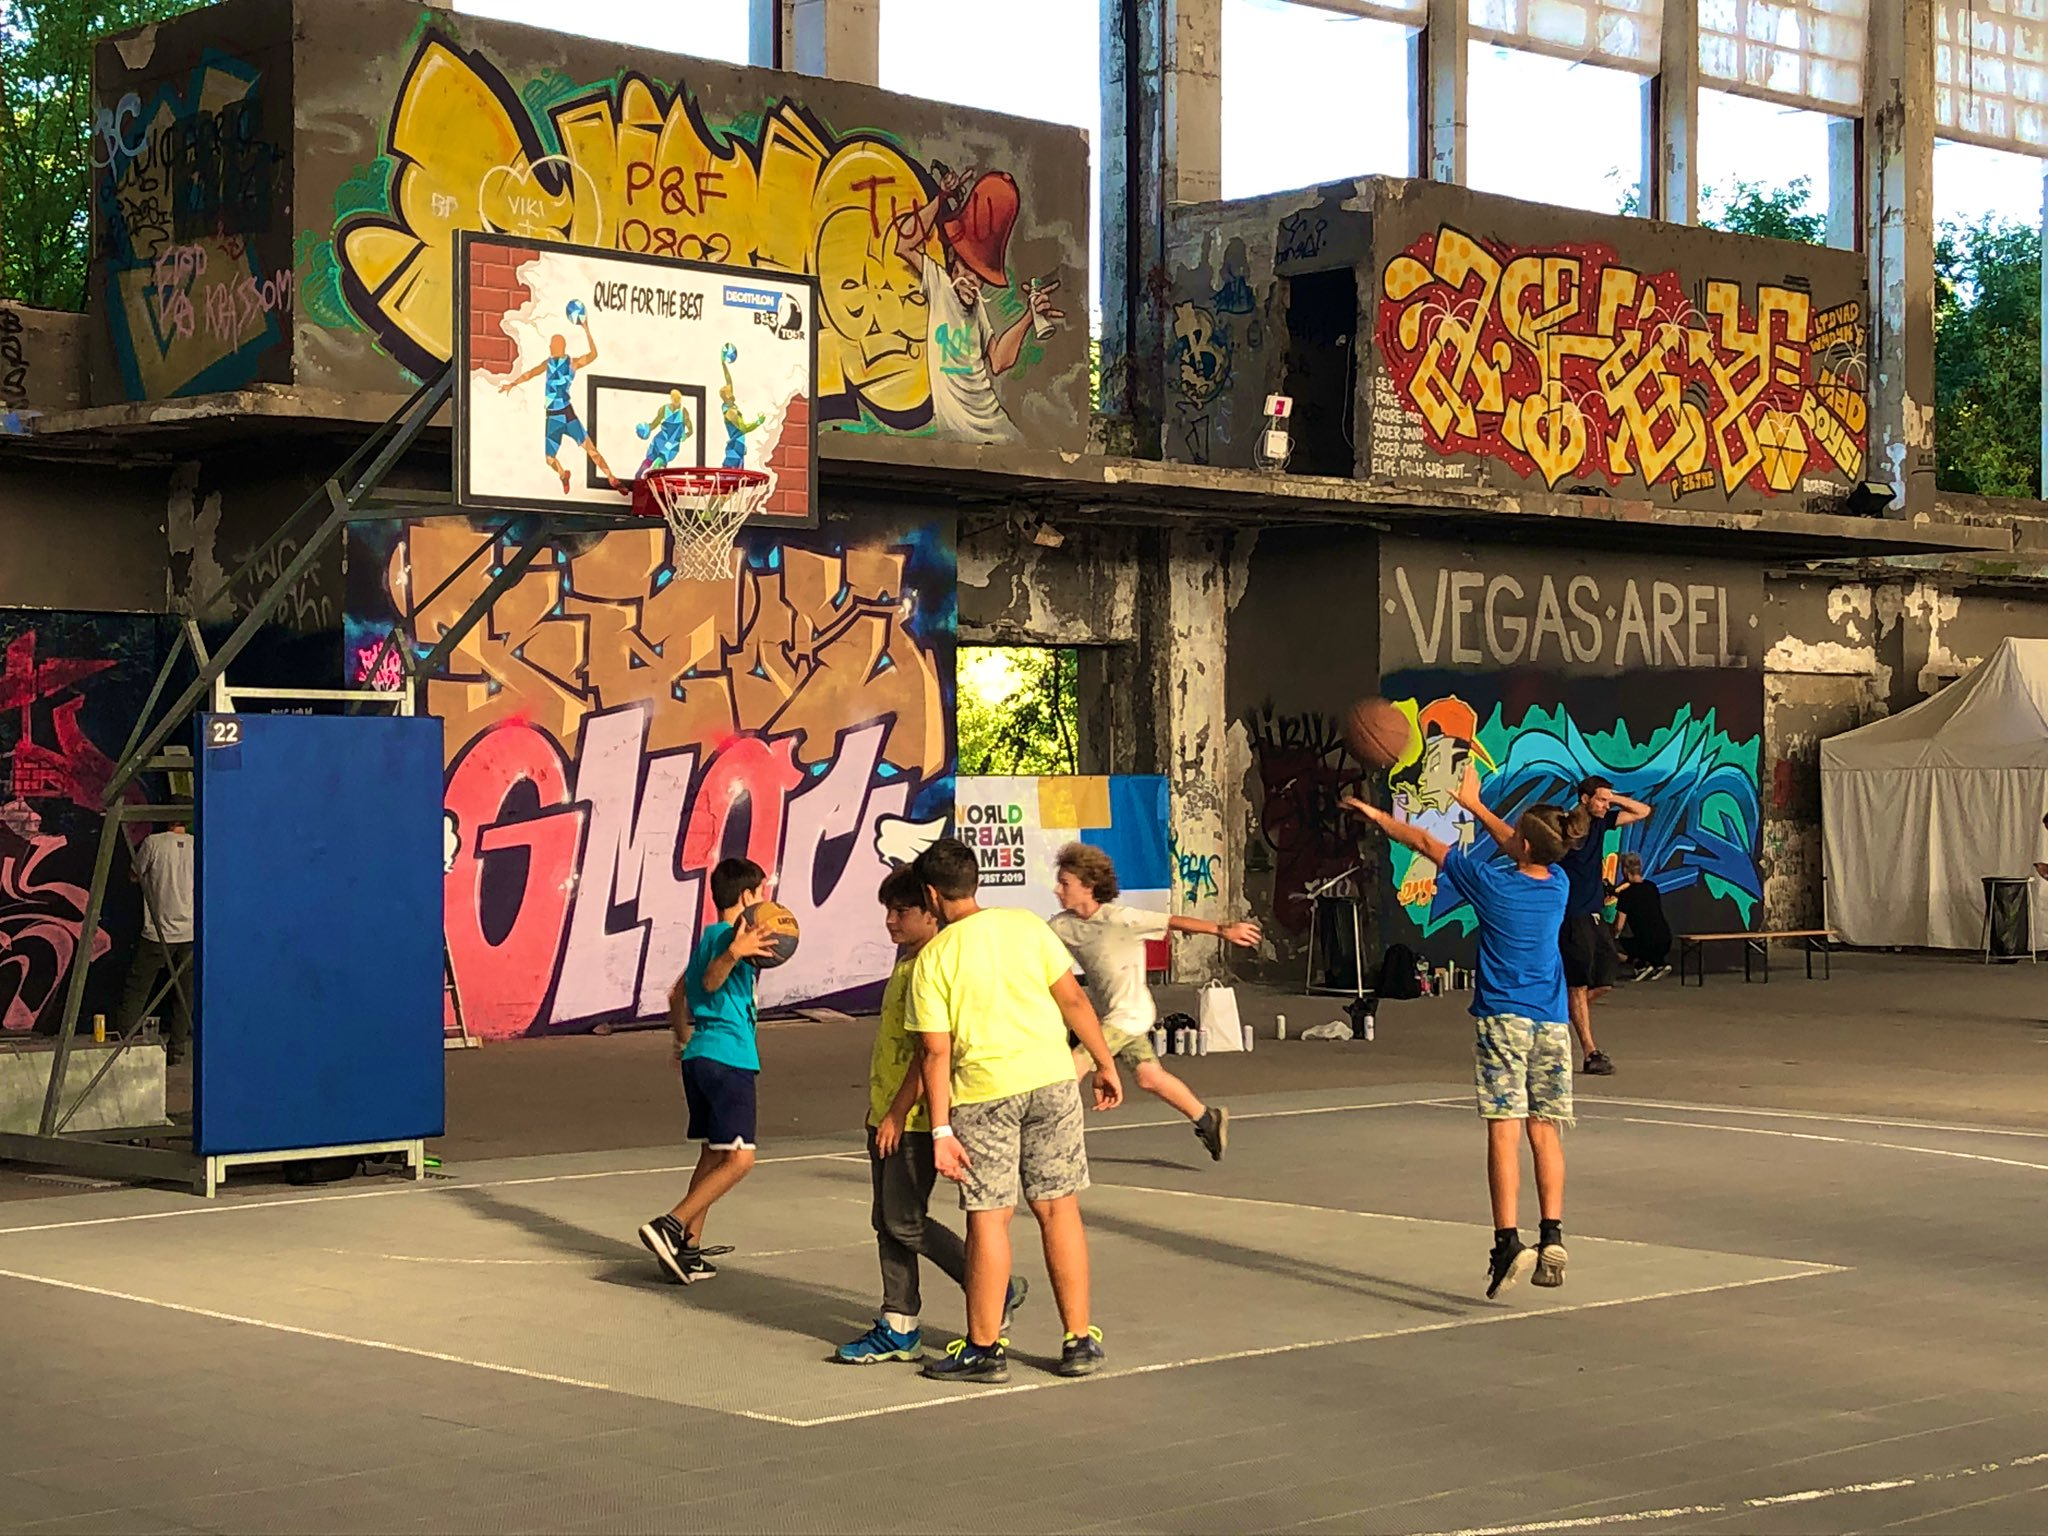 Basketball would also prove popular among visitors ©WUG Budapest 2019